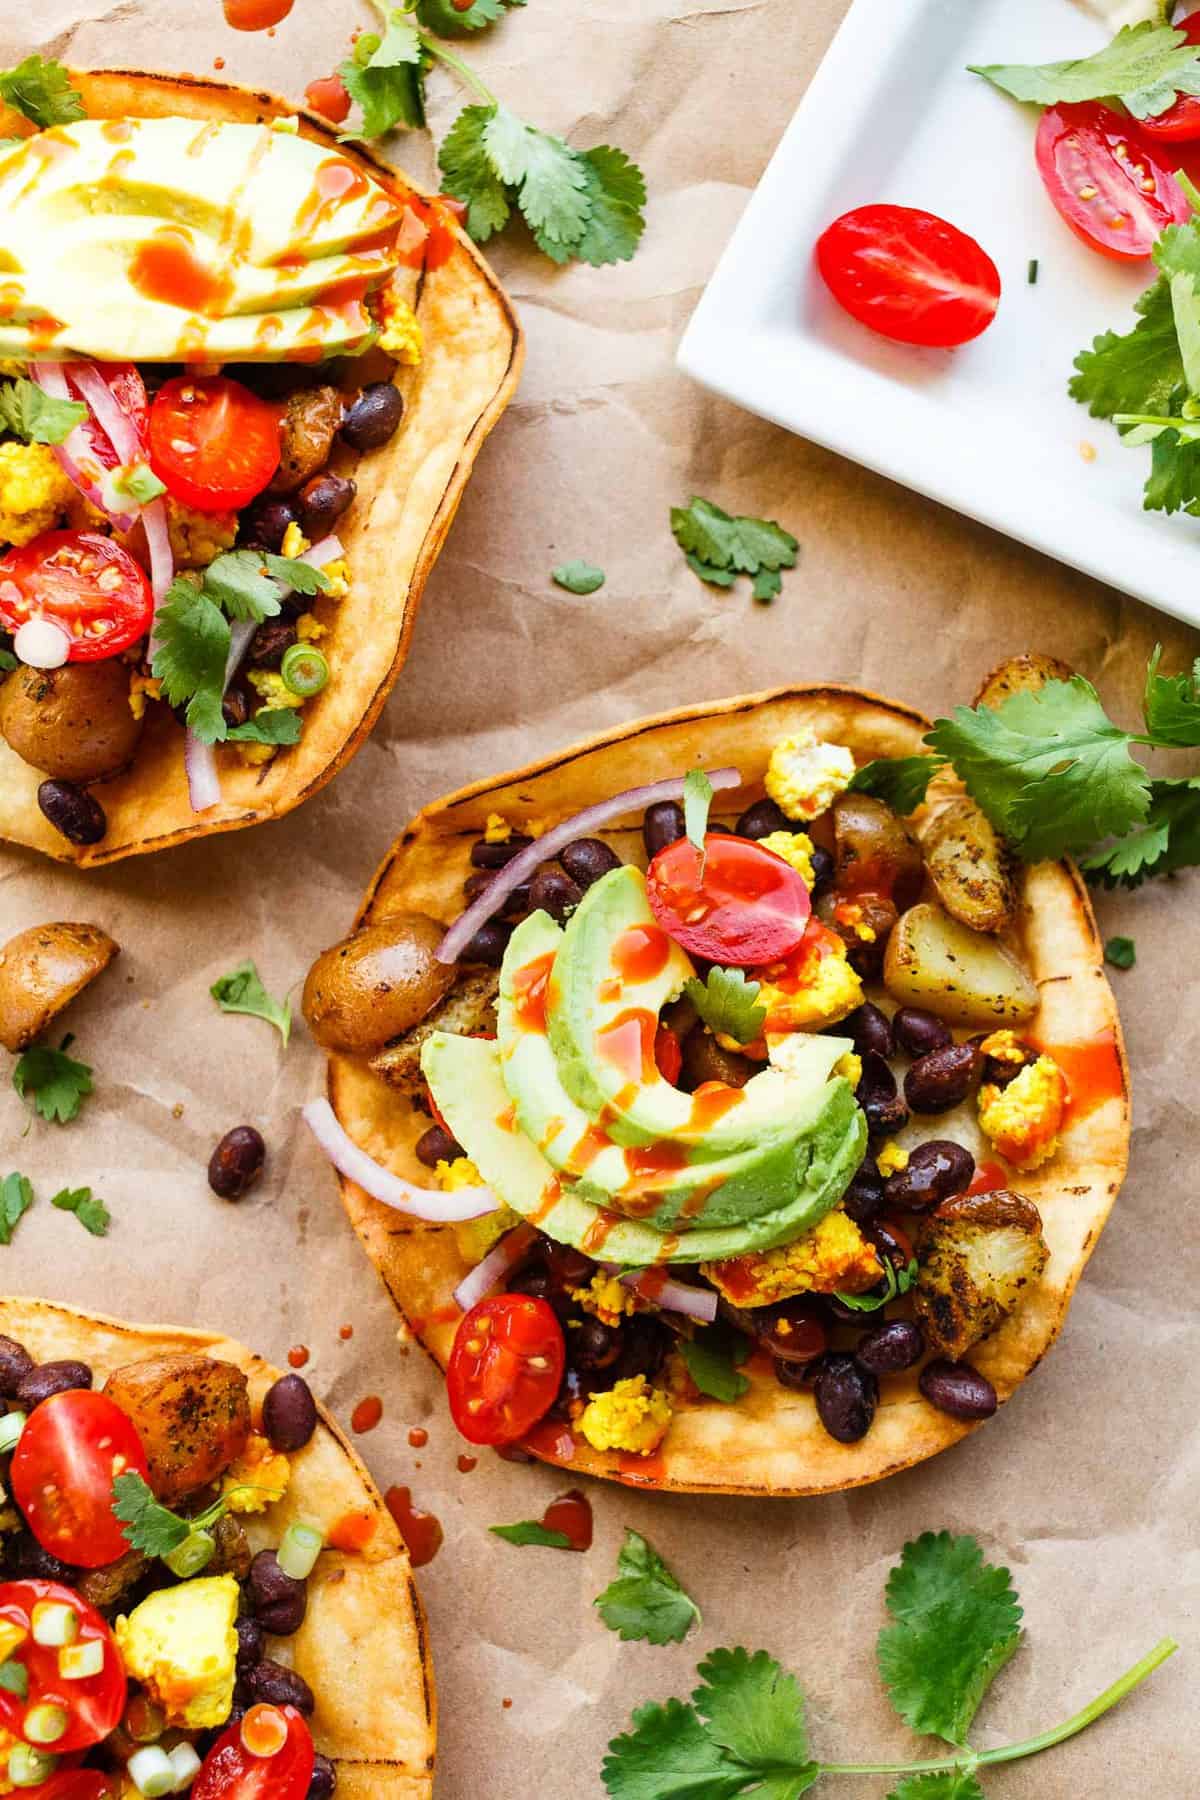 Vegan breakfast tostadas topped with avocado, hot sauce, tomtatoes, and cilantro.